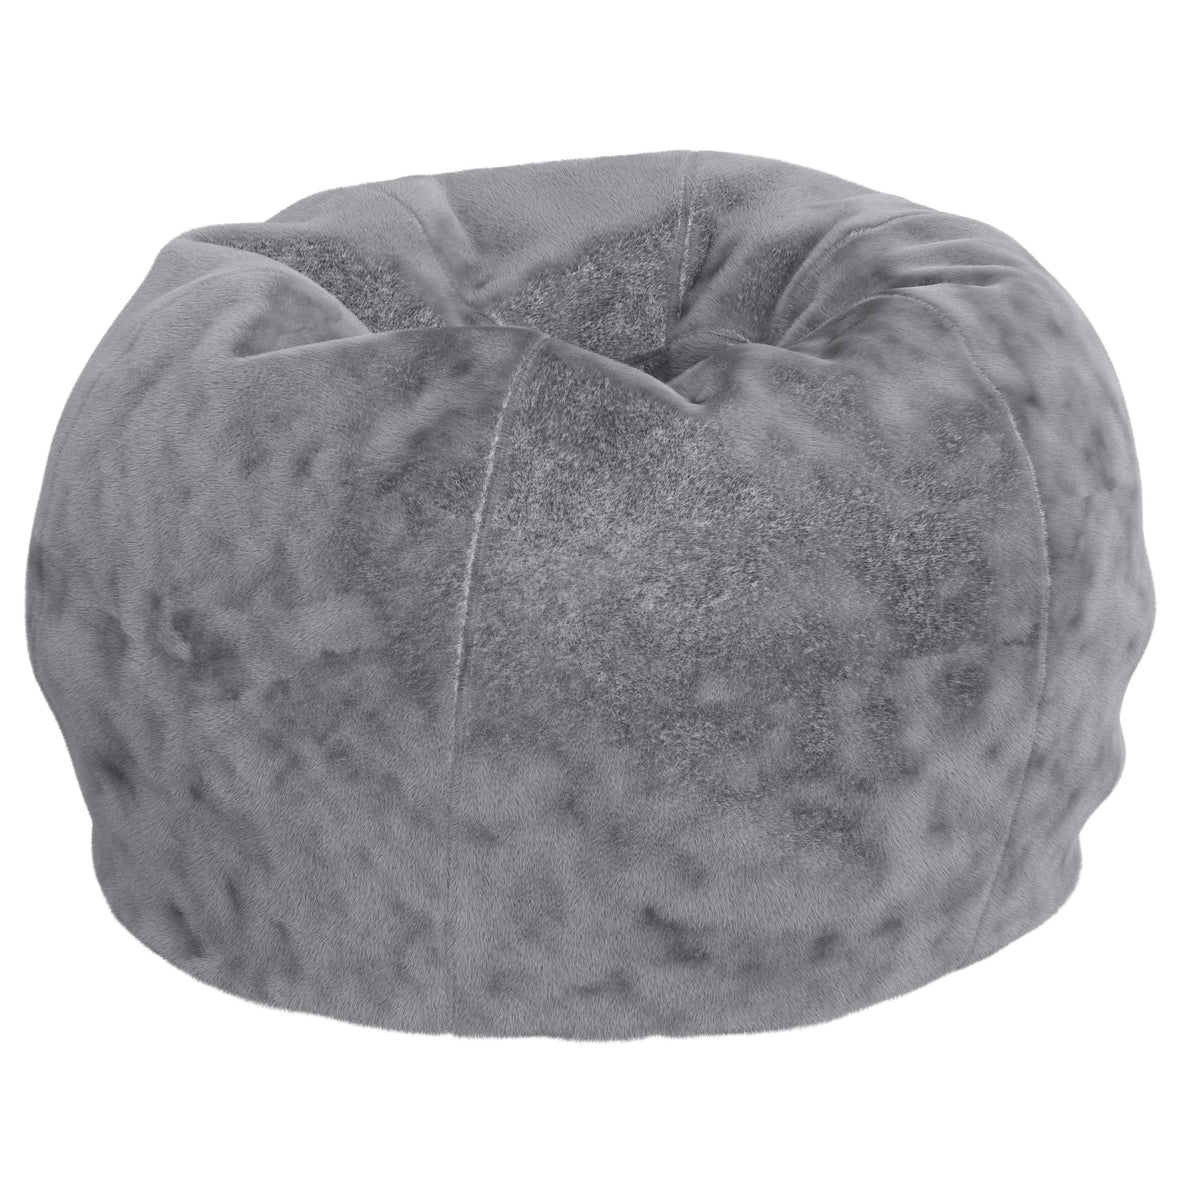 Gray Furry |#| Small Gray Furry Refillable Bean Bag Chair for Kids and Teens